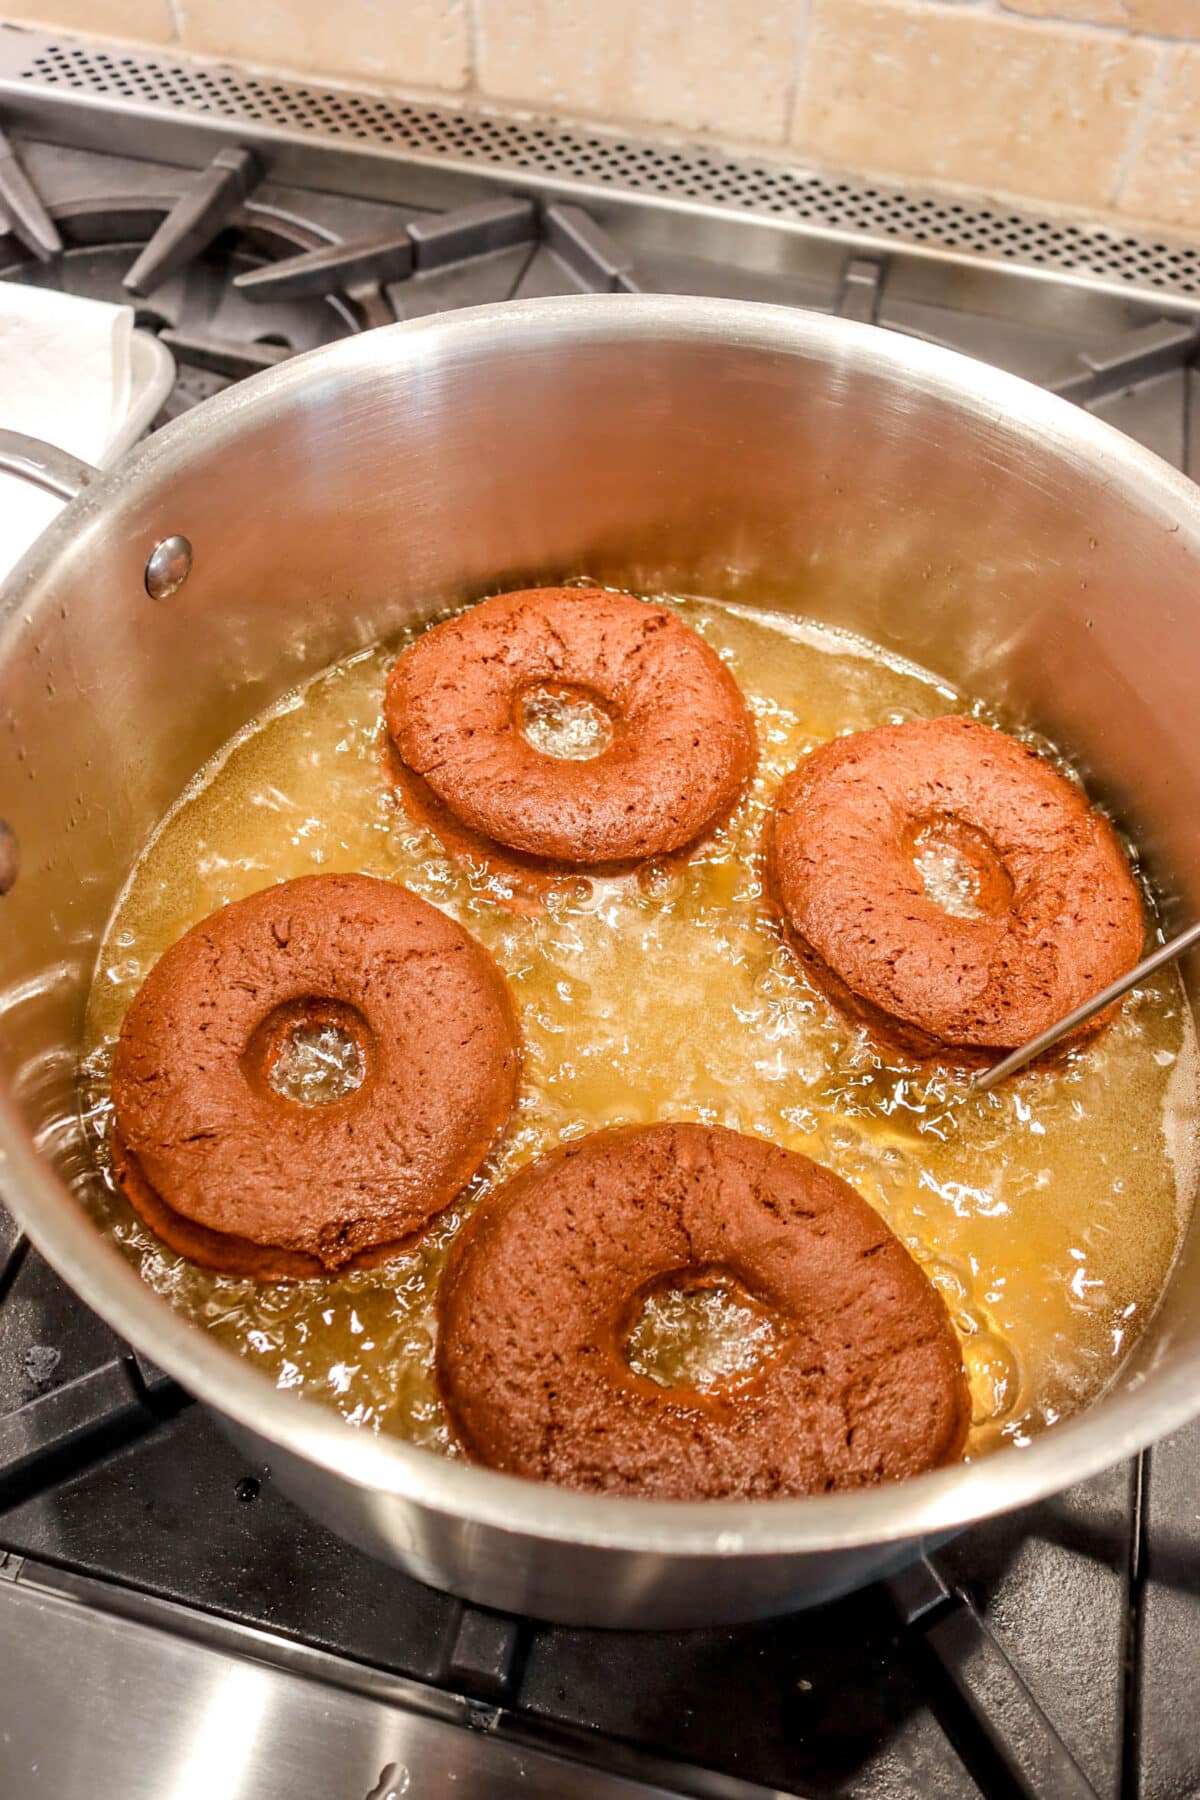 four chocolate doughnuts frying in oil